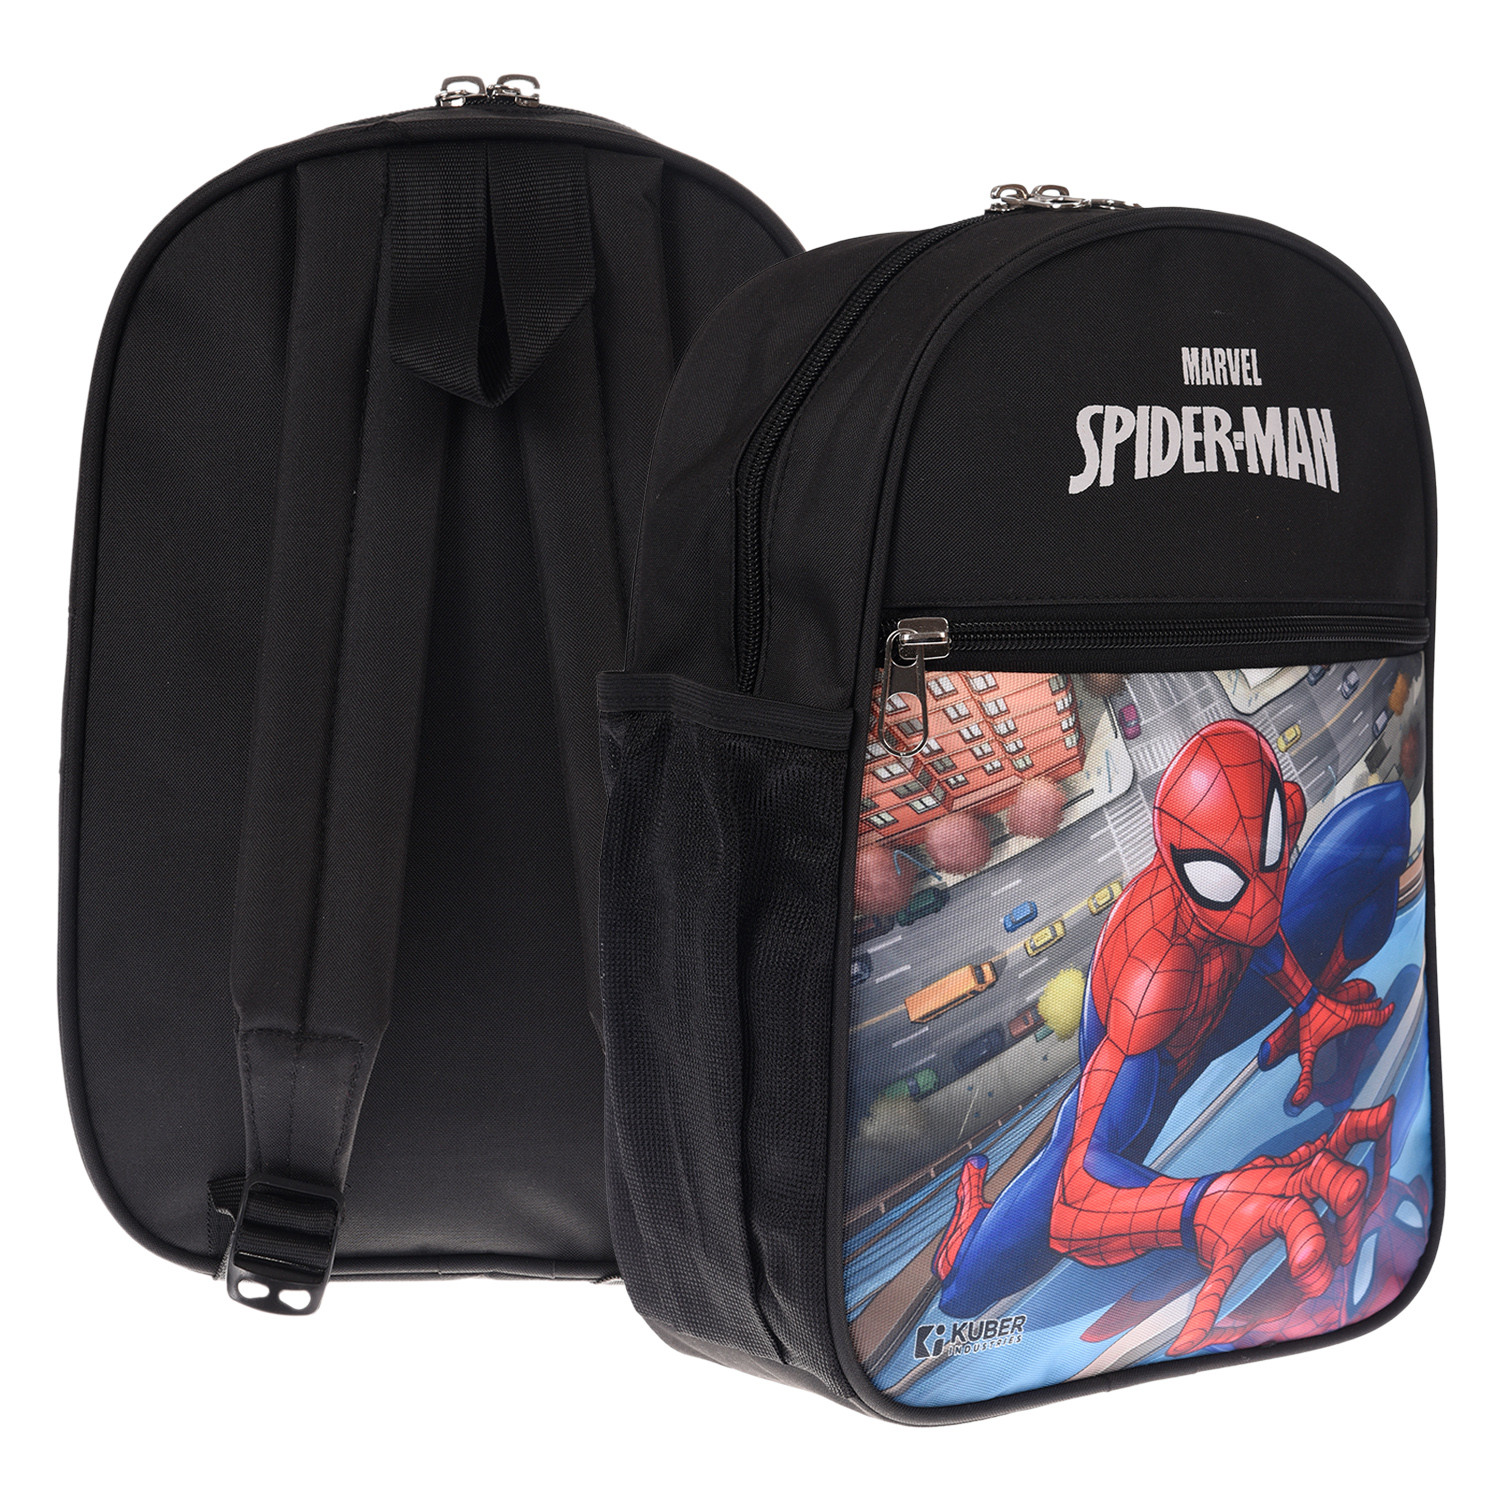 Kuber Industries Marvel Spider-Man School Bag|2 Compartment Rexine School Bagpack|School Bag for Kids|School Bags for Girls with Zipper Closure|Small Size (Black)